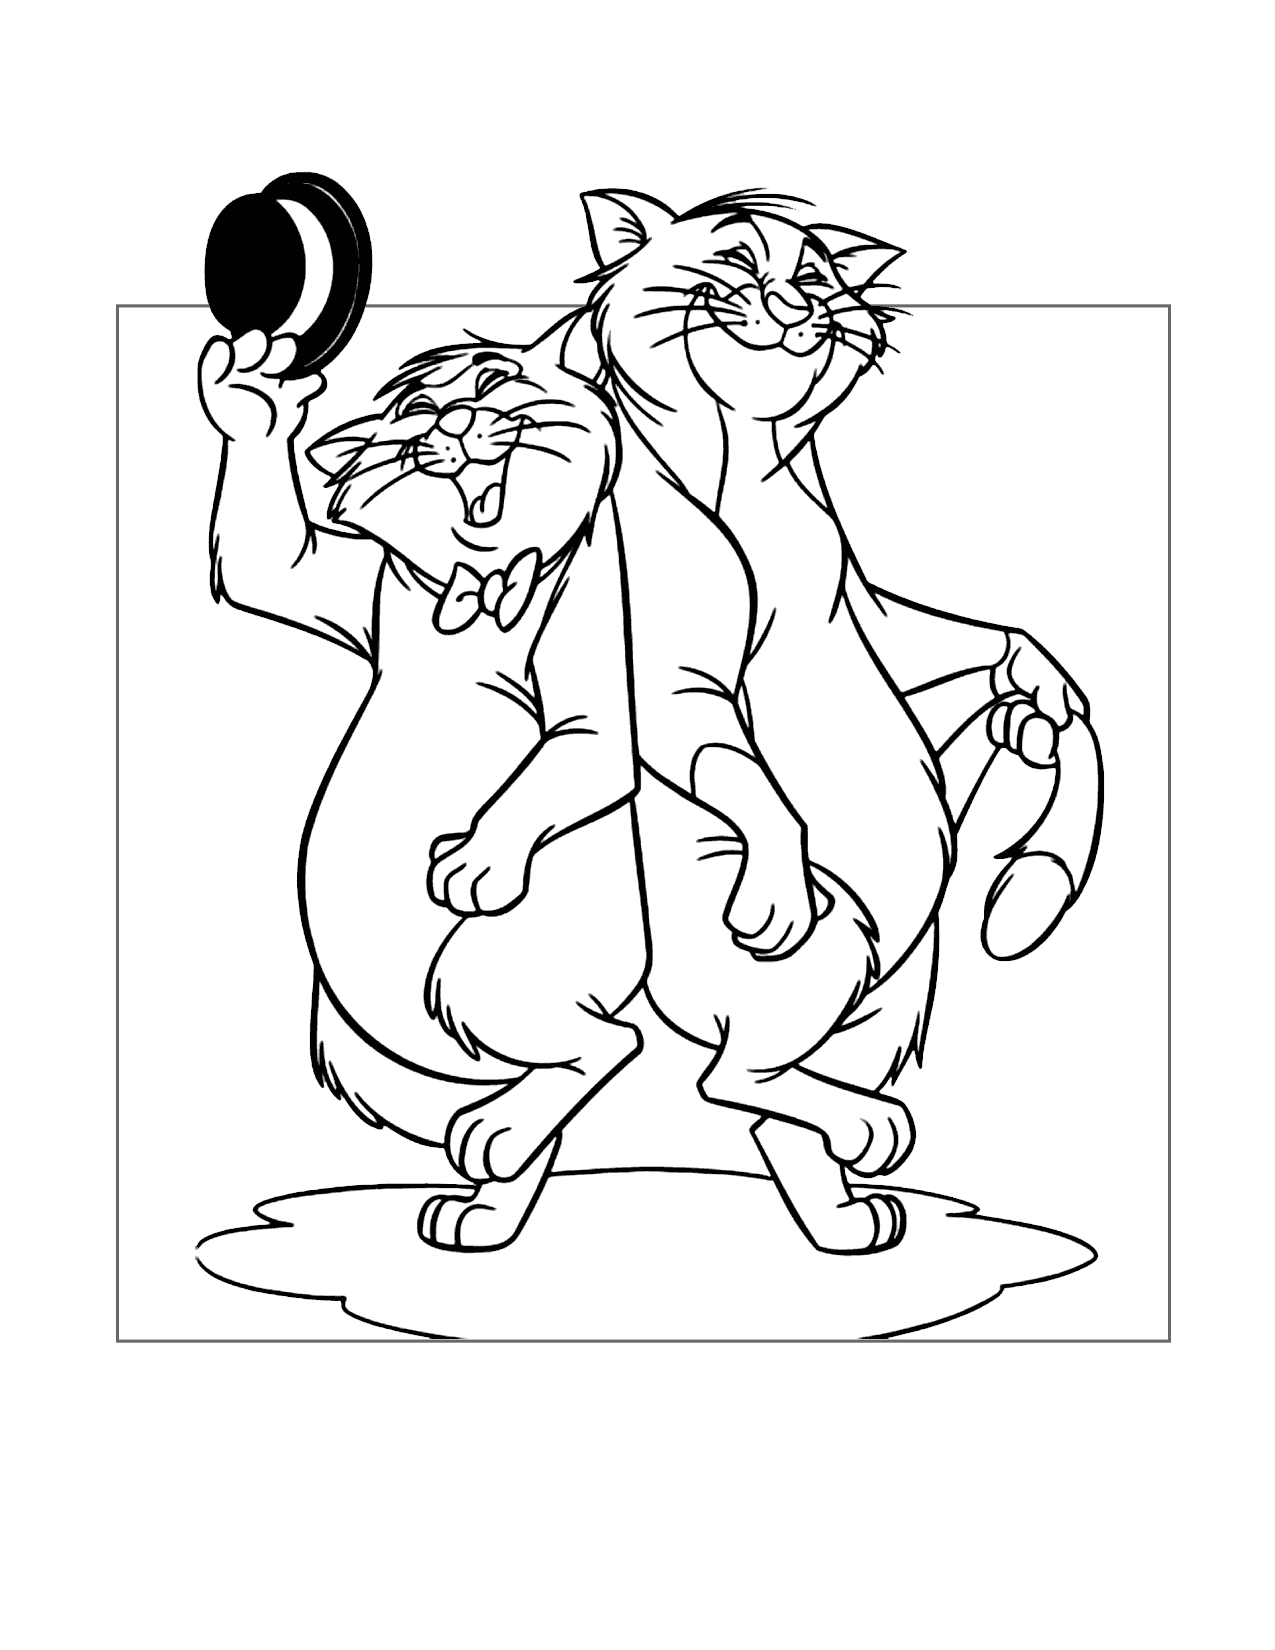 Scat Cat And Omalley Dance Coloring Page